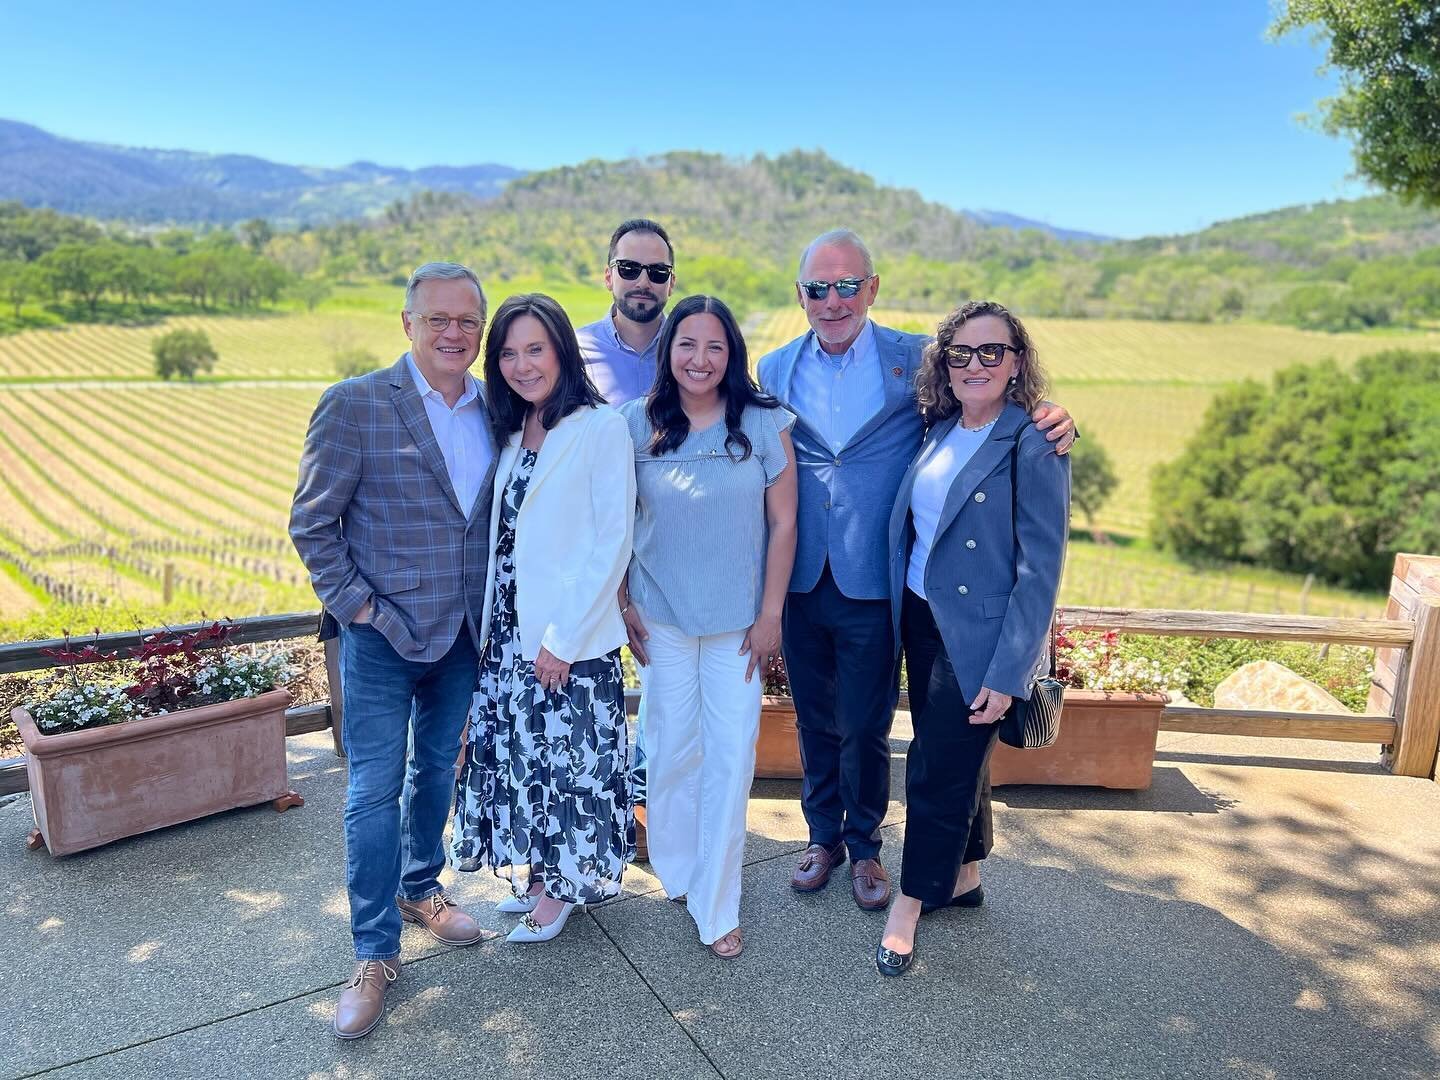 A wonderful wine tasting at The Joseph Phelps Winery in Napa with some great friends and partners in ministry - Sam &amp; Julie Bernal and Ron &amp; Martha Doornink. 

God makes wine that gladdens the human heart - Psalm 104:15. 

A little reveal - i